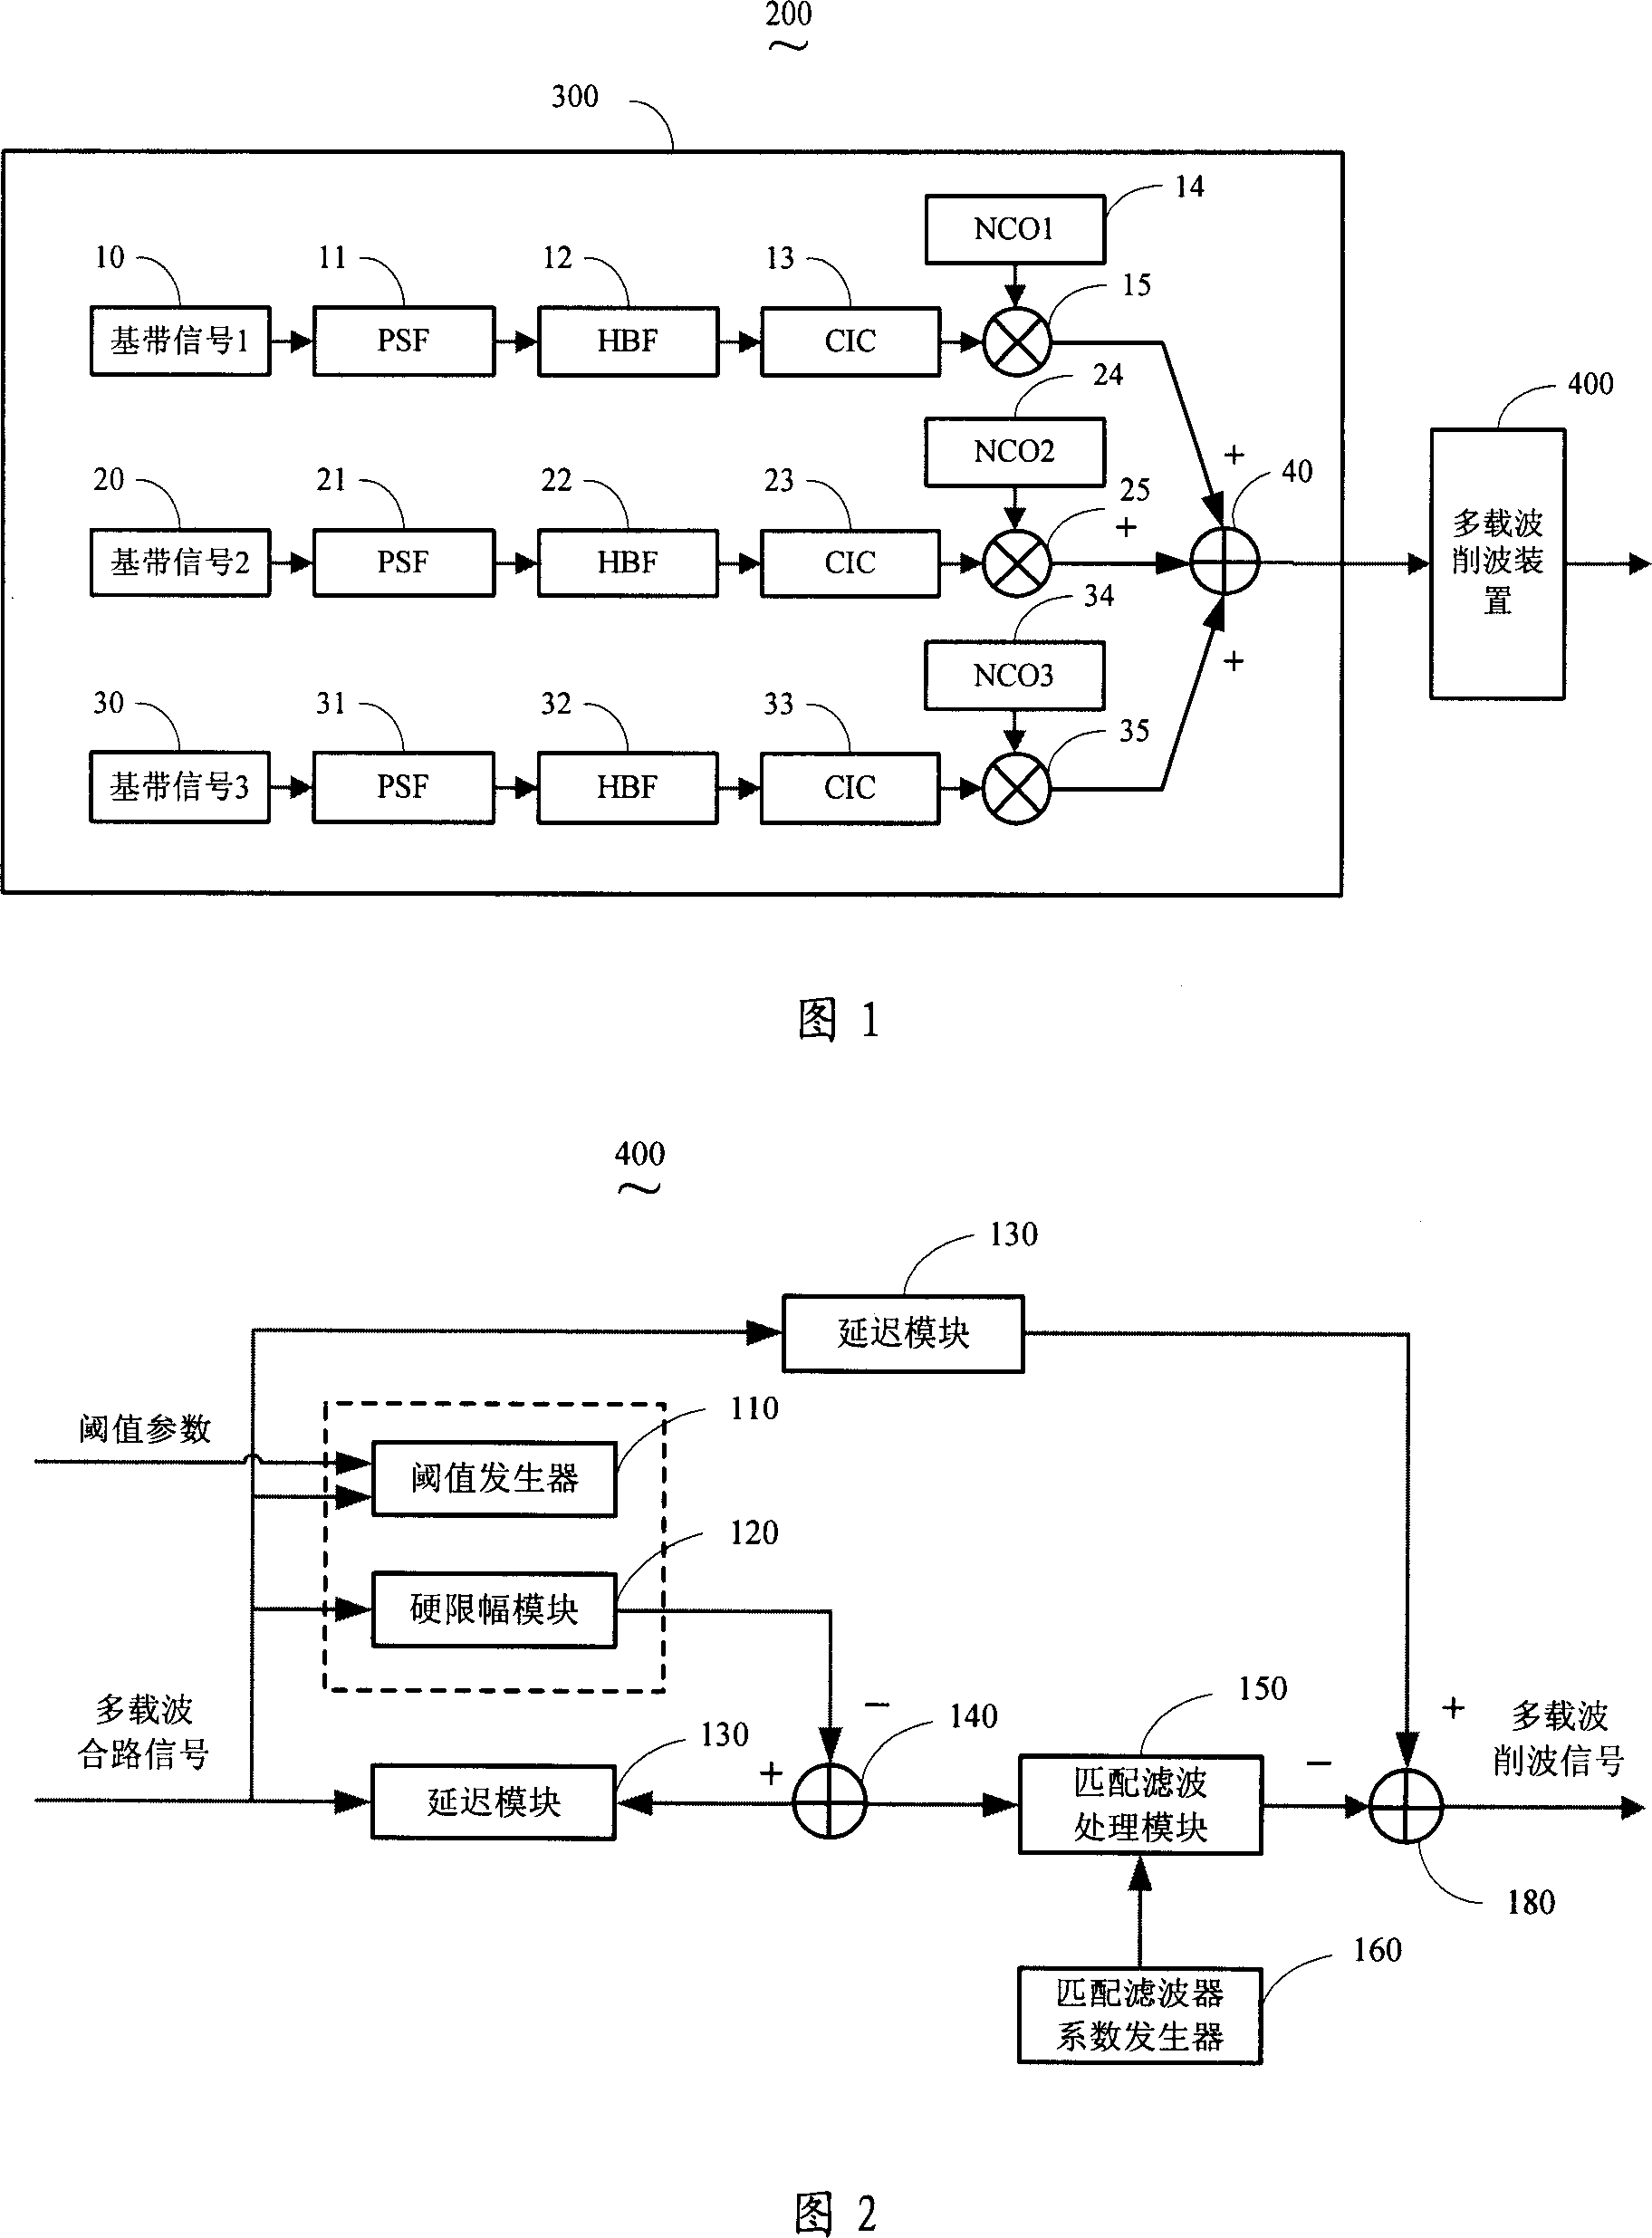 A method for reducing peak to average ratio of multicarrier